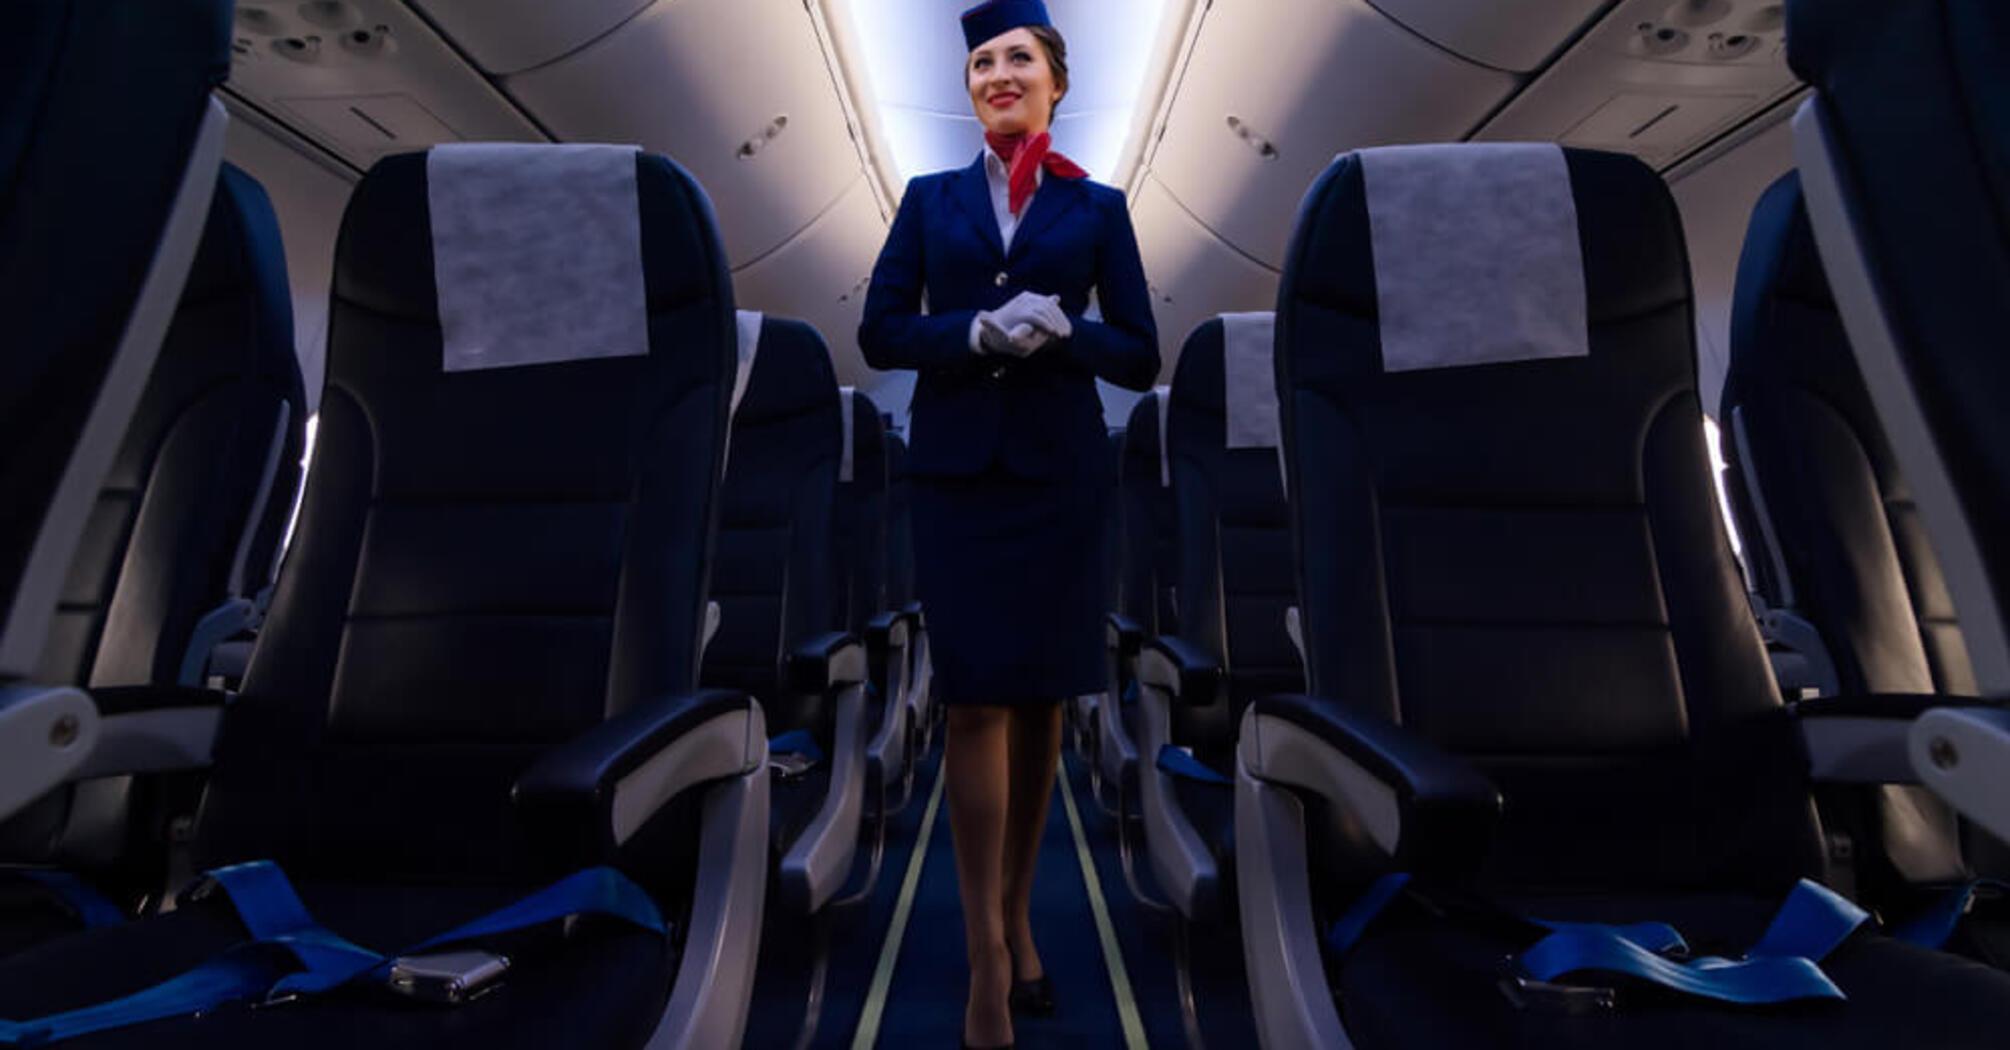 Pilot calls for a dress code on board